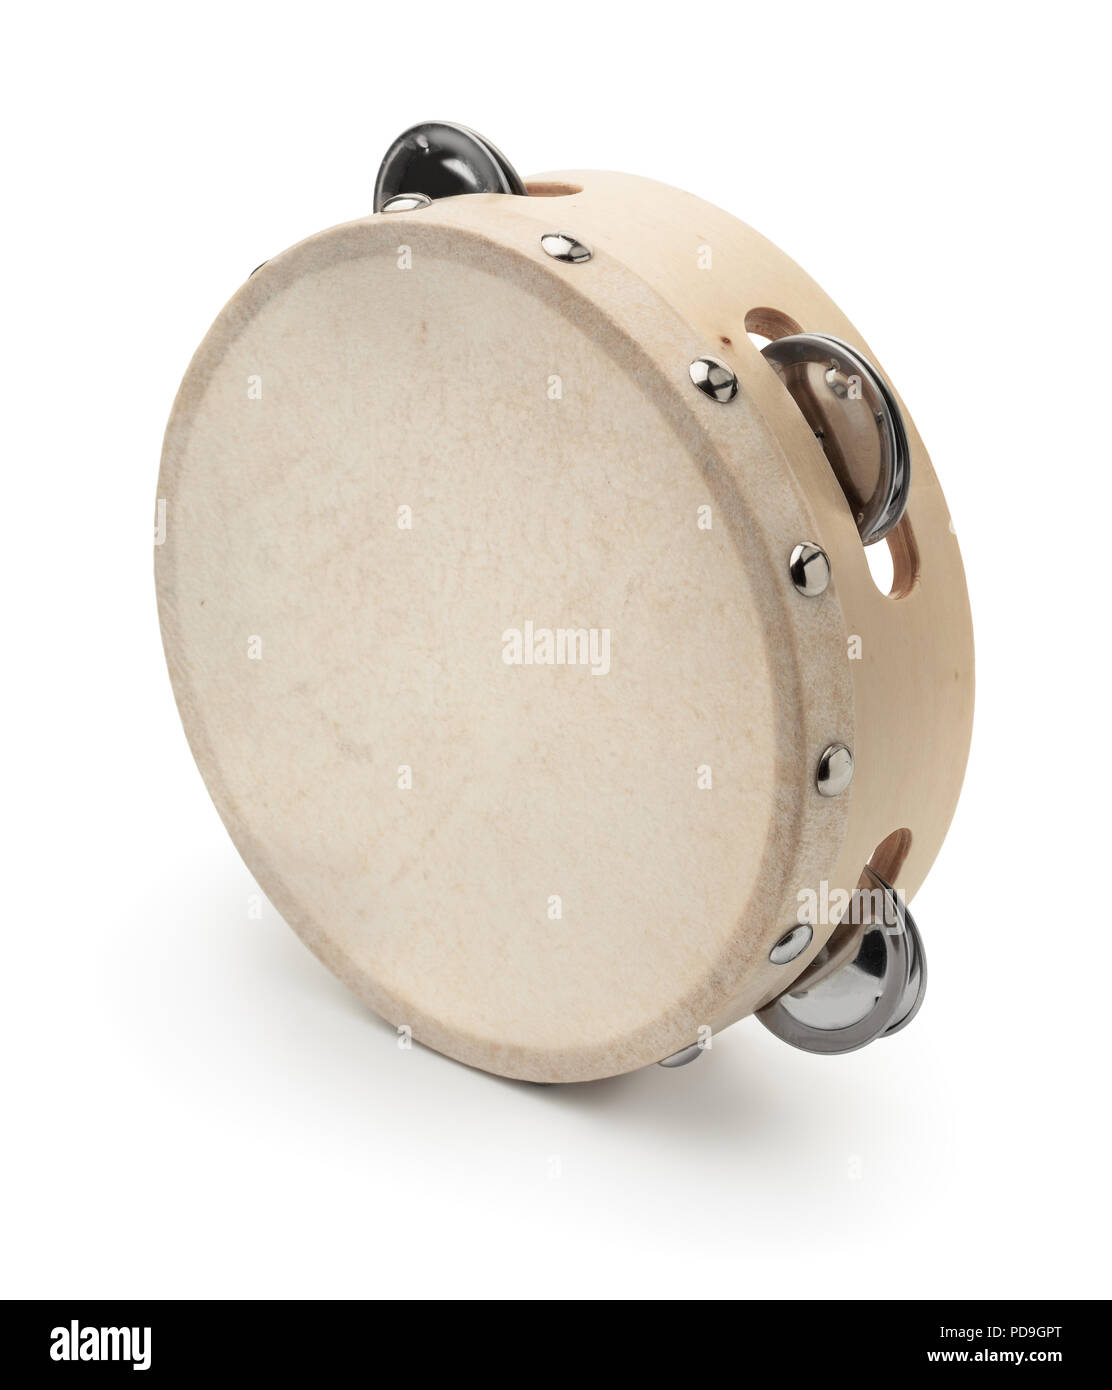 Classic wooden tambourine isolated on white Stock Photo